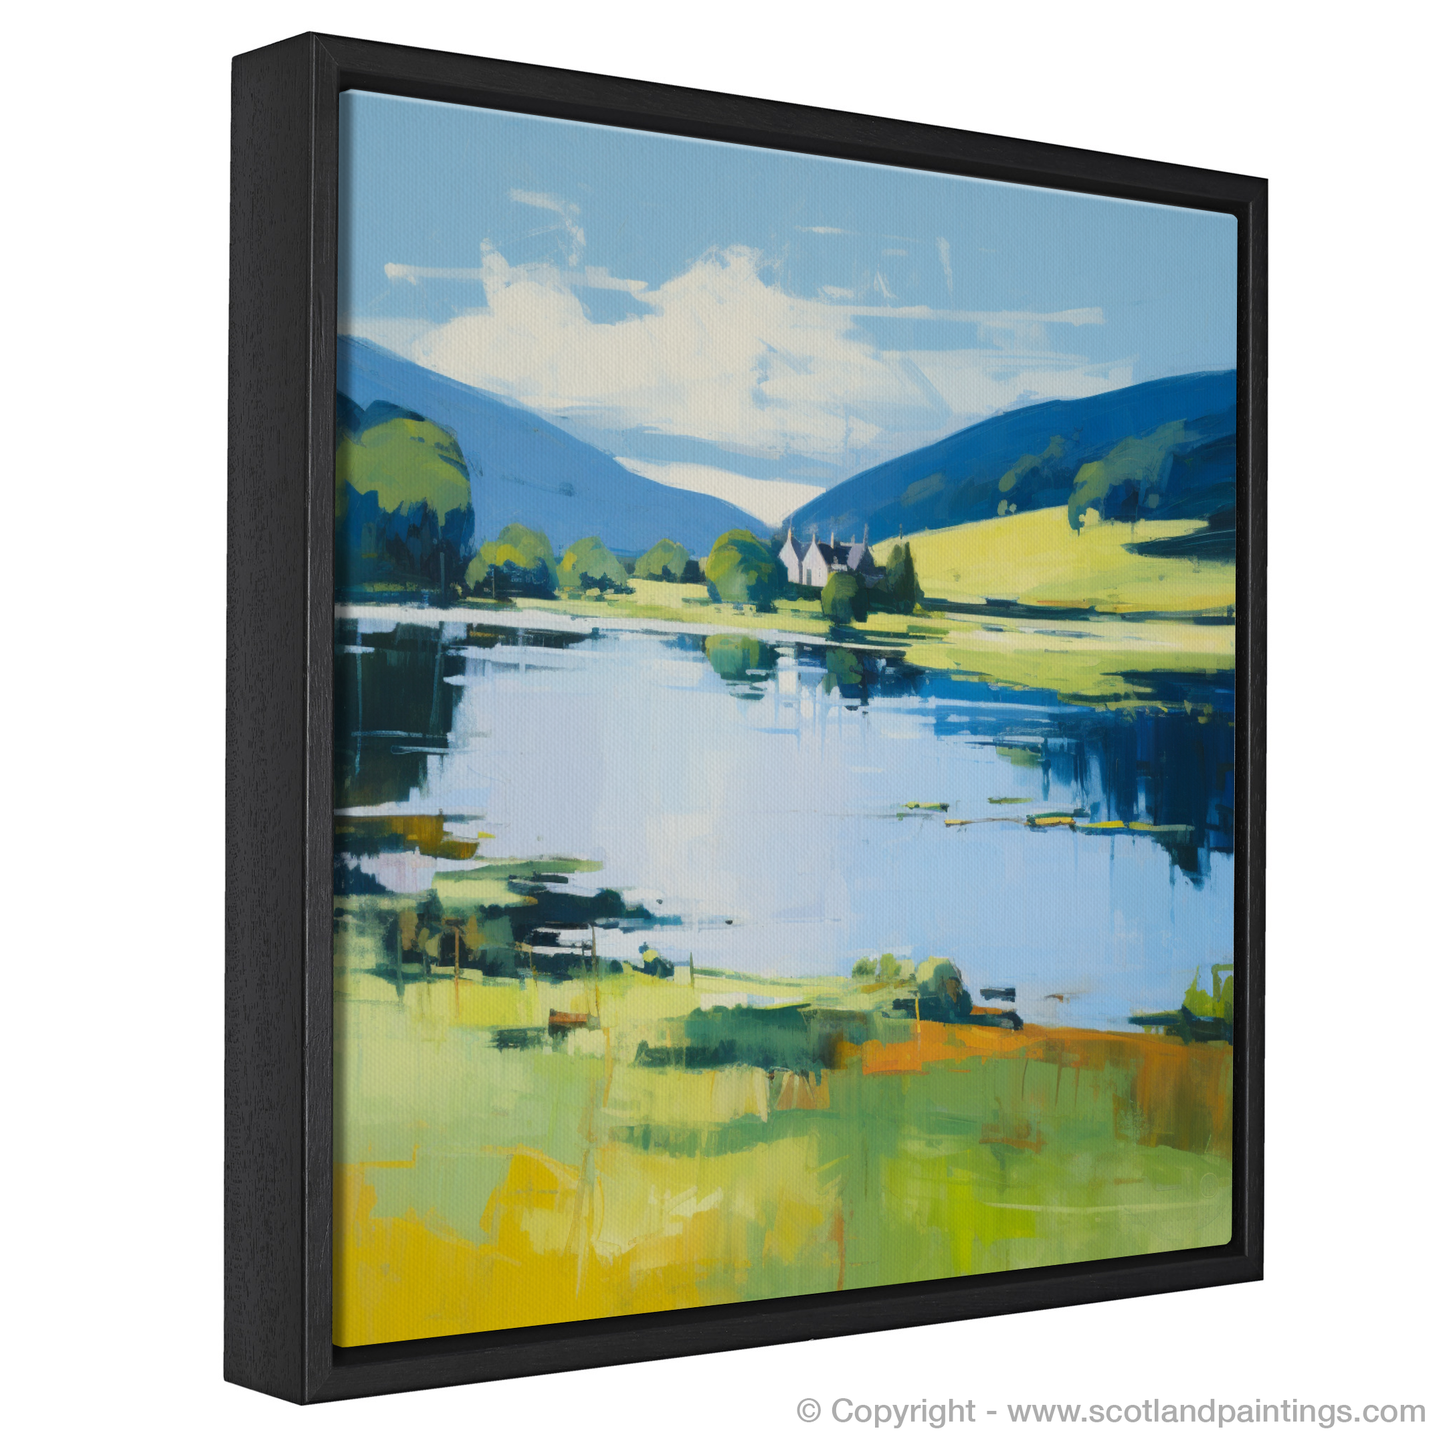 Loch Tay Serenity: A Contemporary Reflection of Perthshire's Splendour